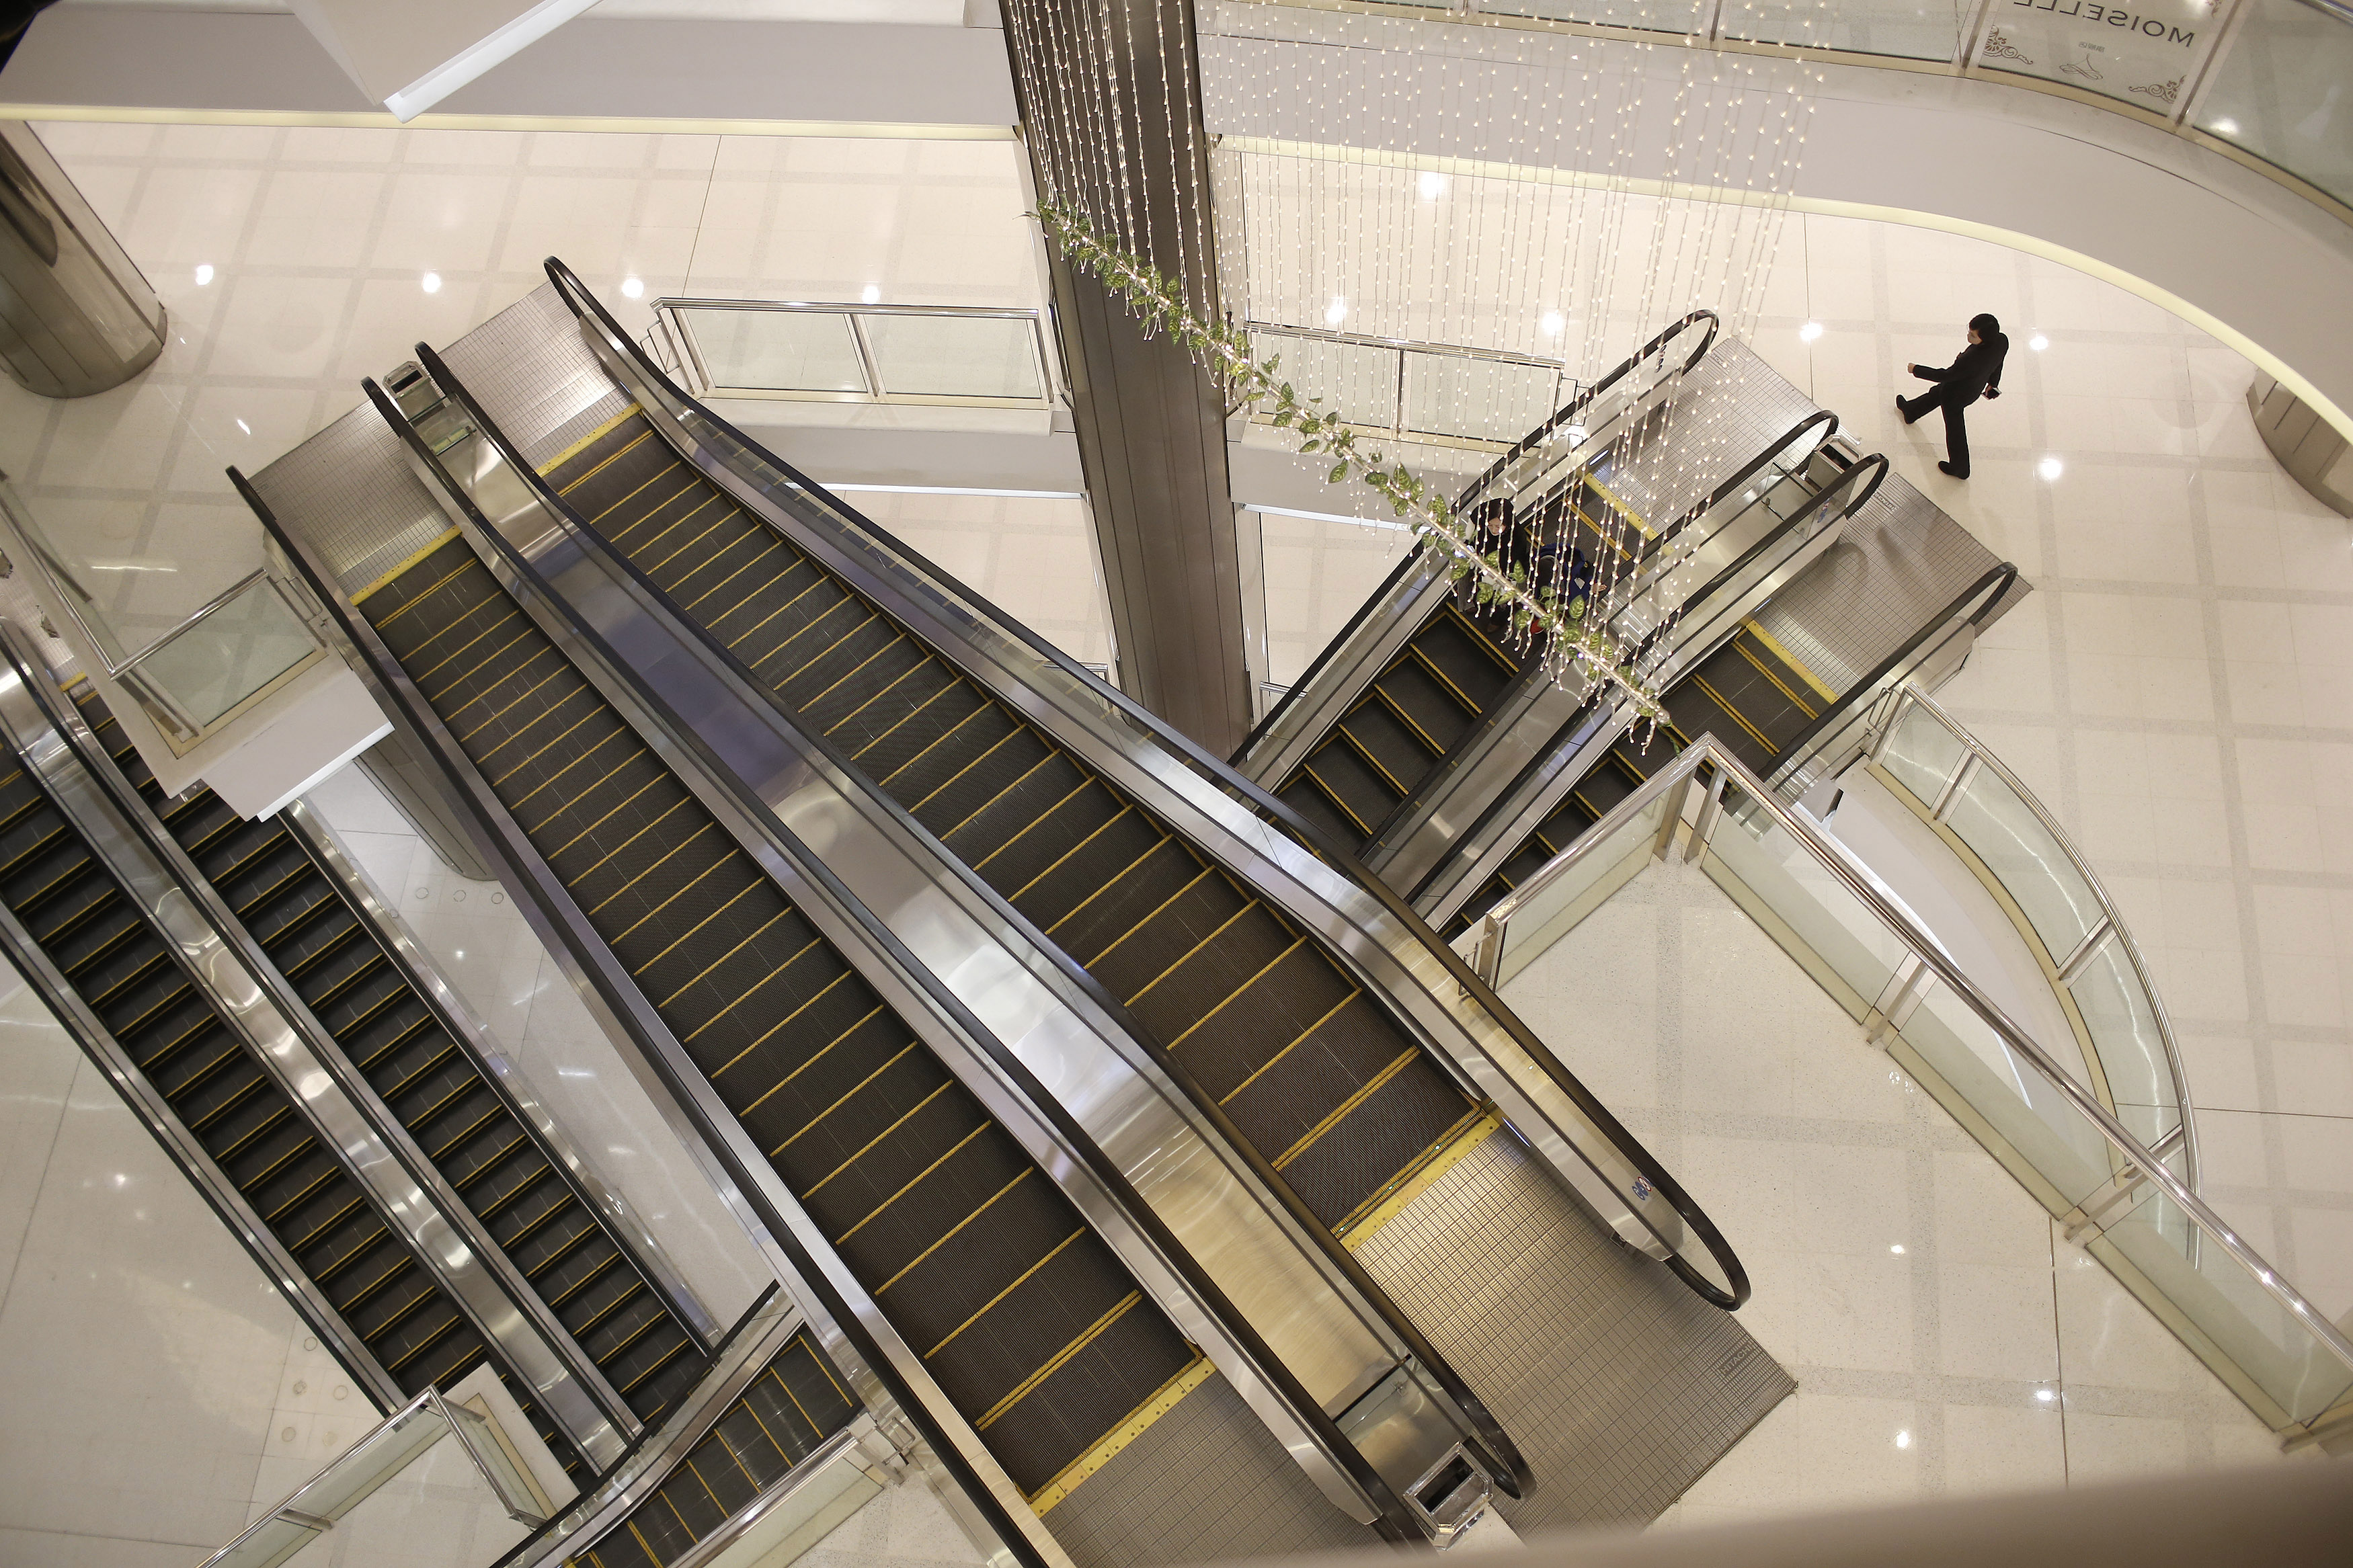 A woman walks next to escalators at a department store in Shanghai, March 8, 2015. (© Aly Song / Reuters—REUTERS)